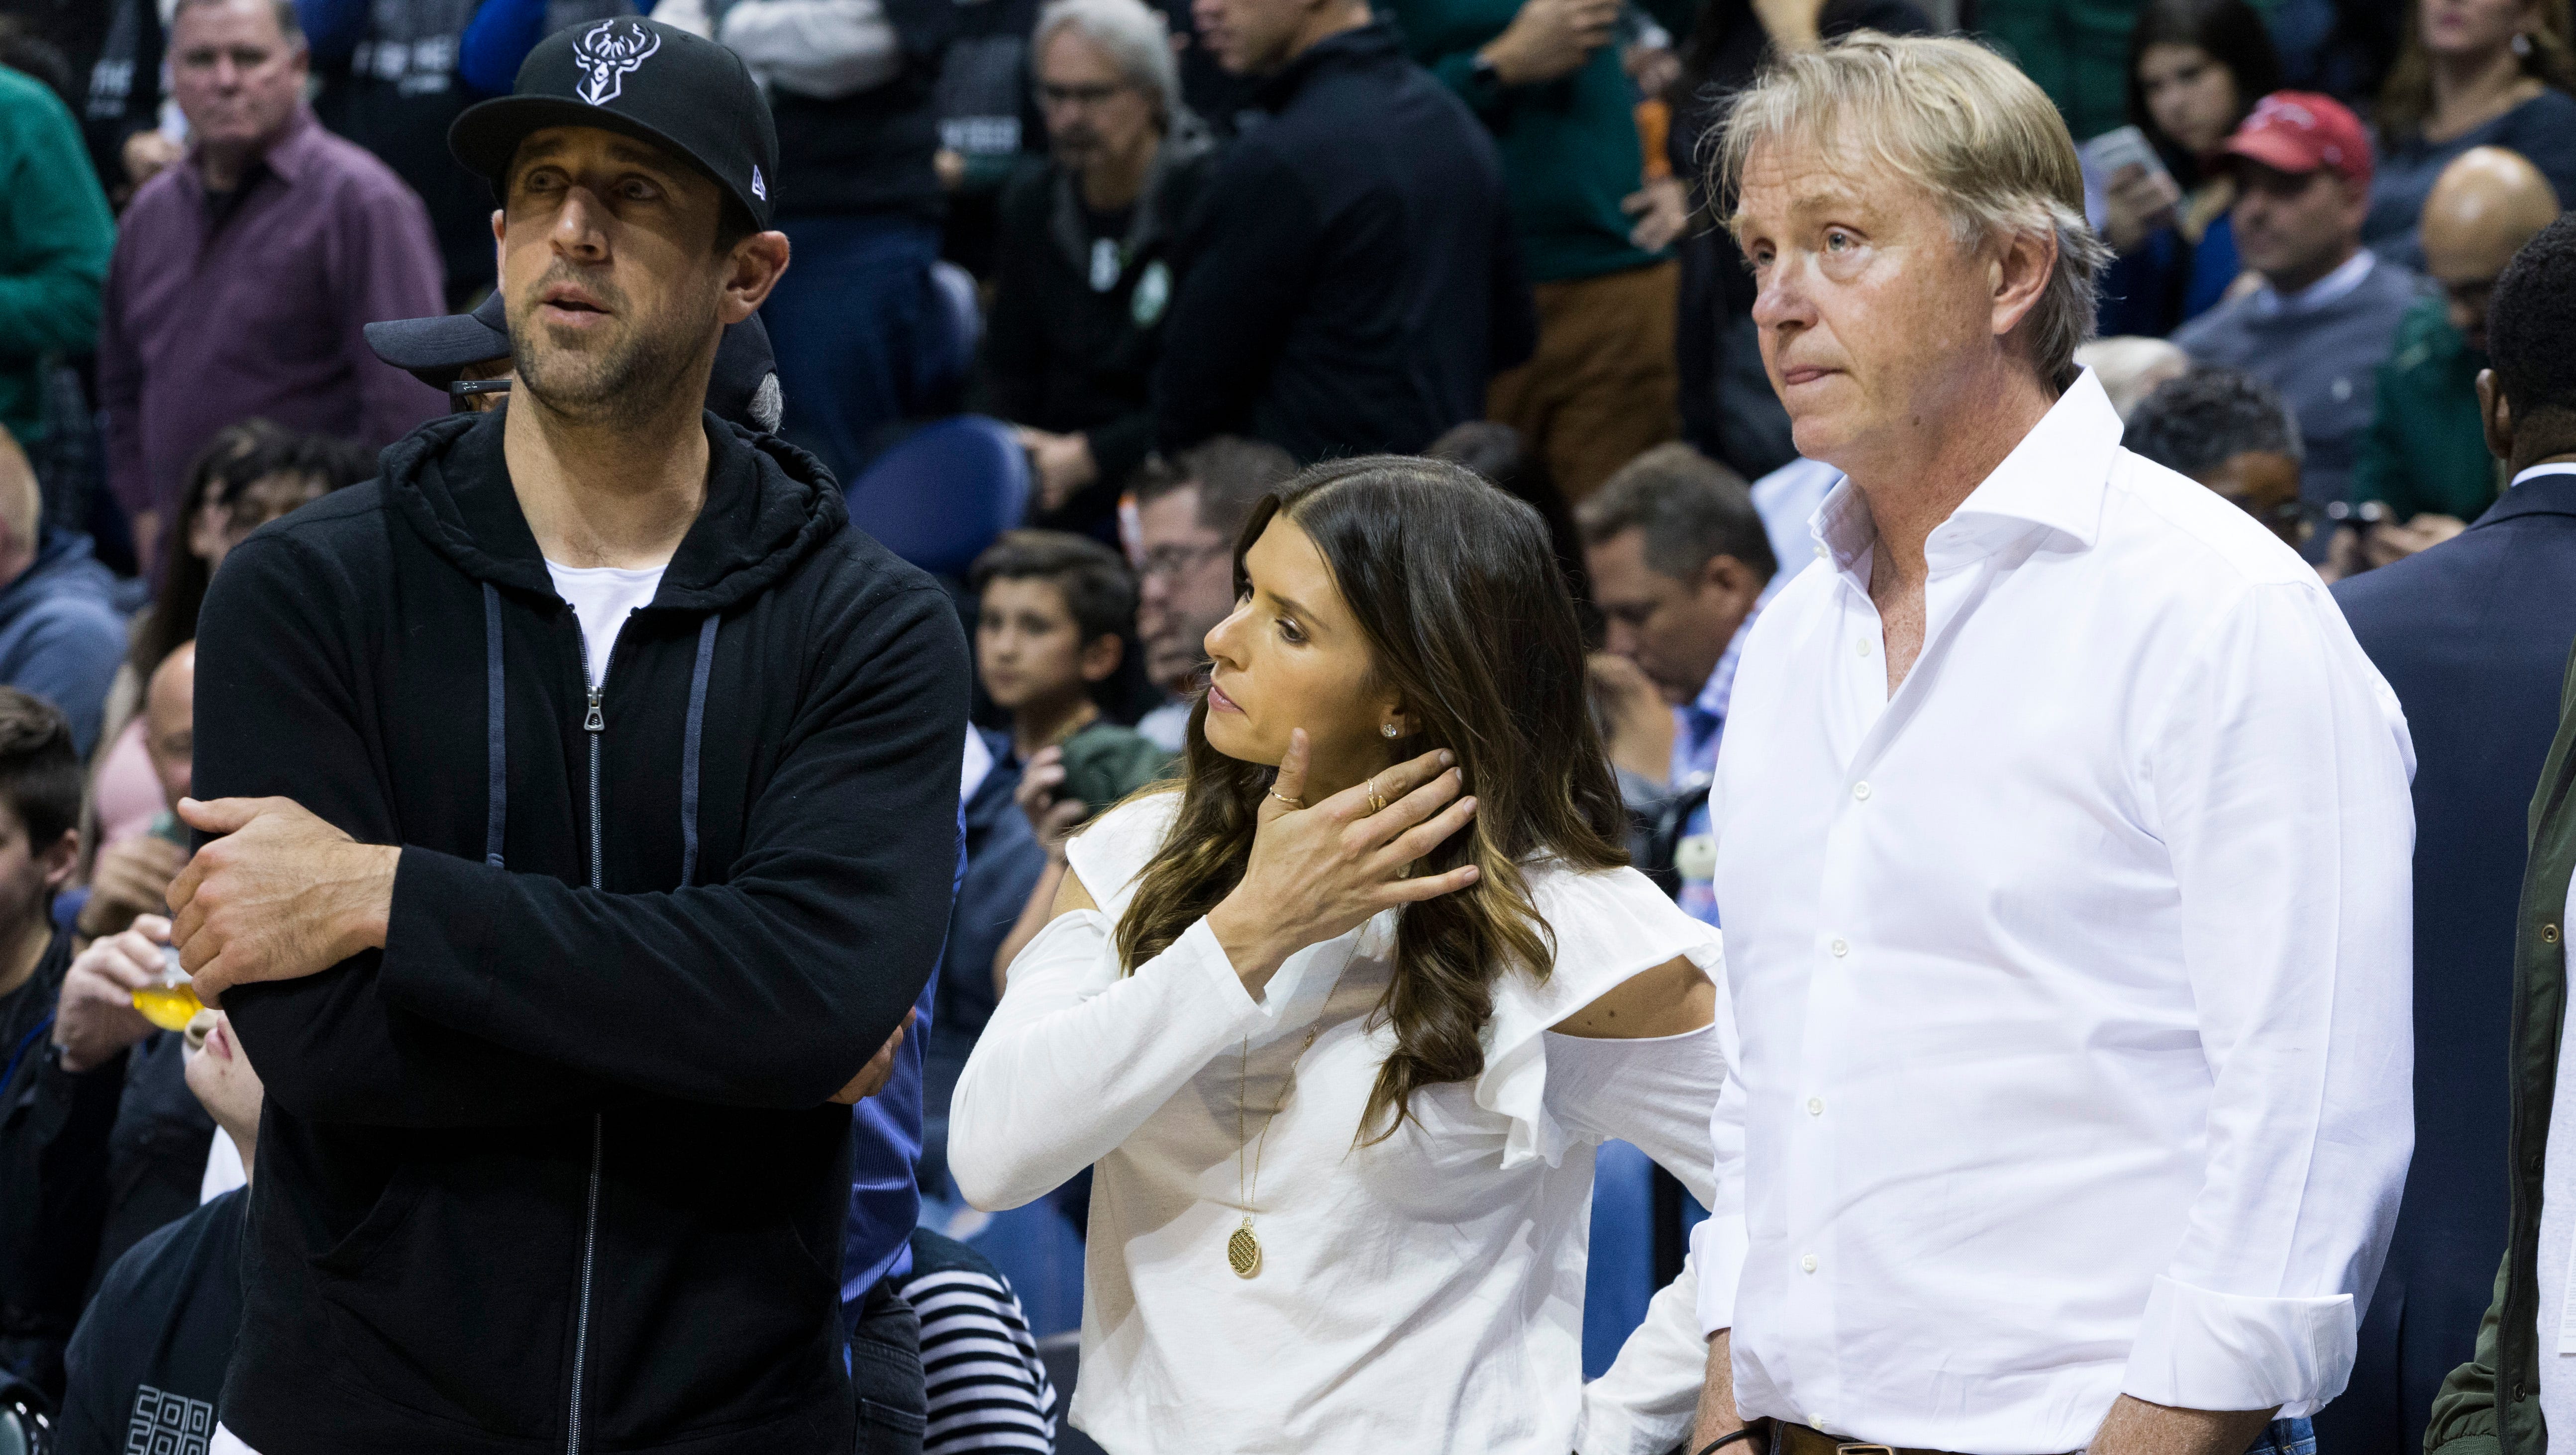 Green Bay Packers quarterback Aaron Rodgers (left) and Danica Patrick, his race car driver girlfriend, look on with Wes Edens, one of the Milwaukee Bucks' owners at the BMO Harris Bradley Center on Friday night.